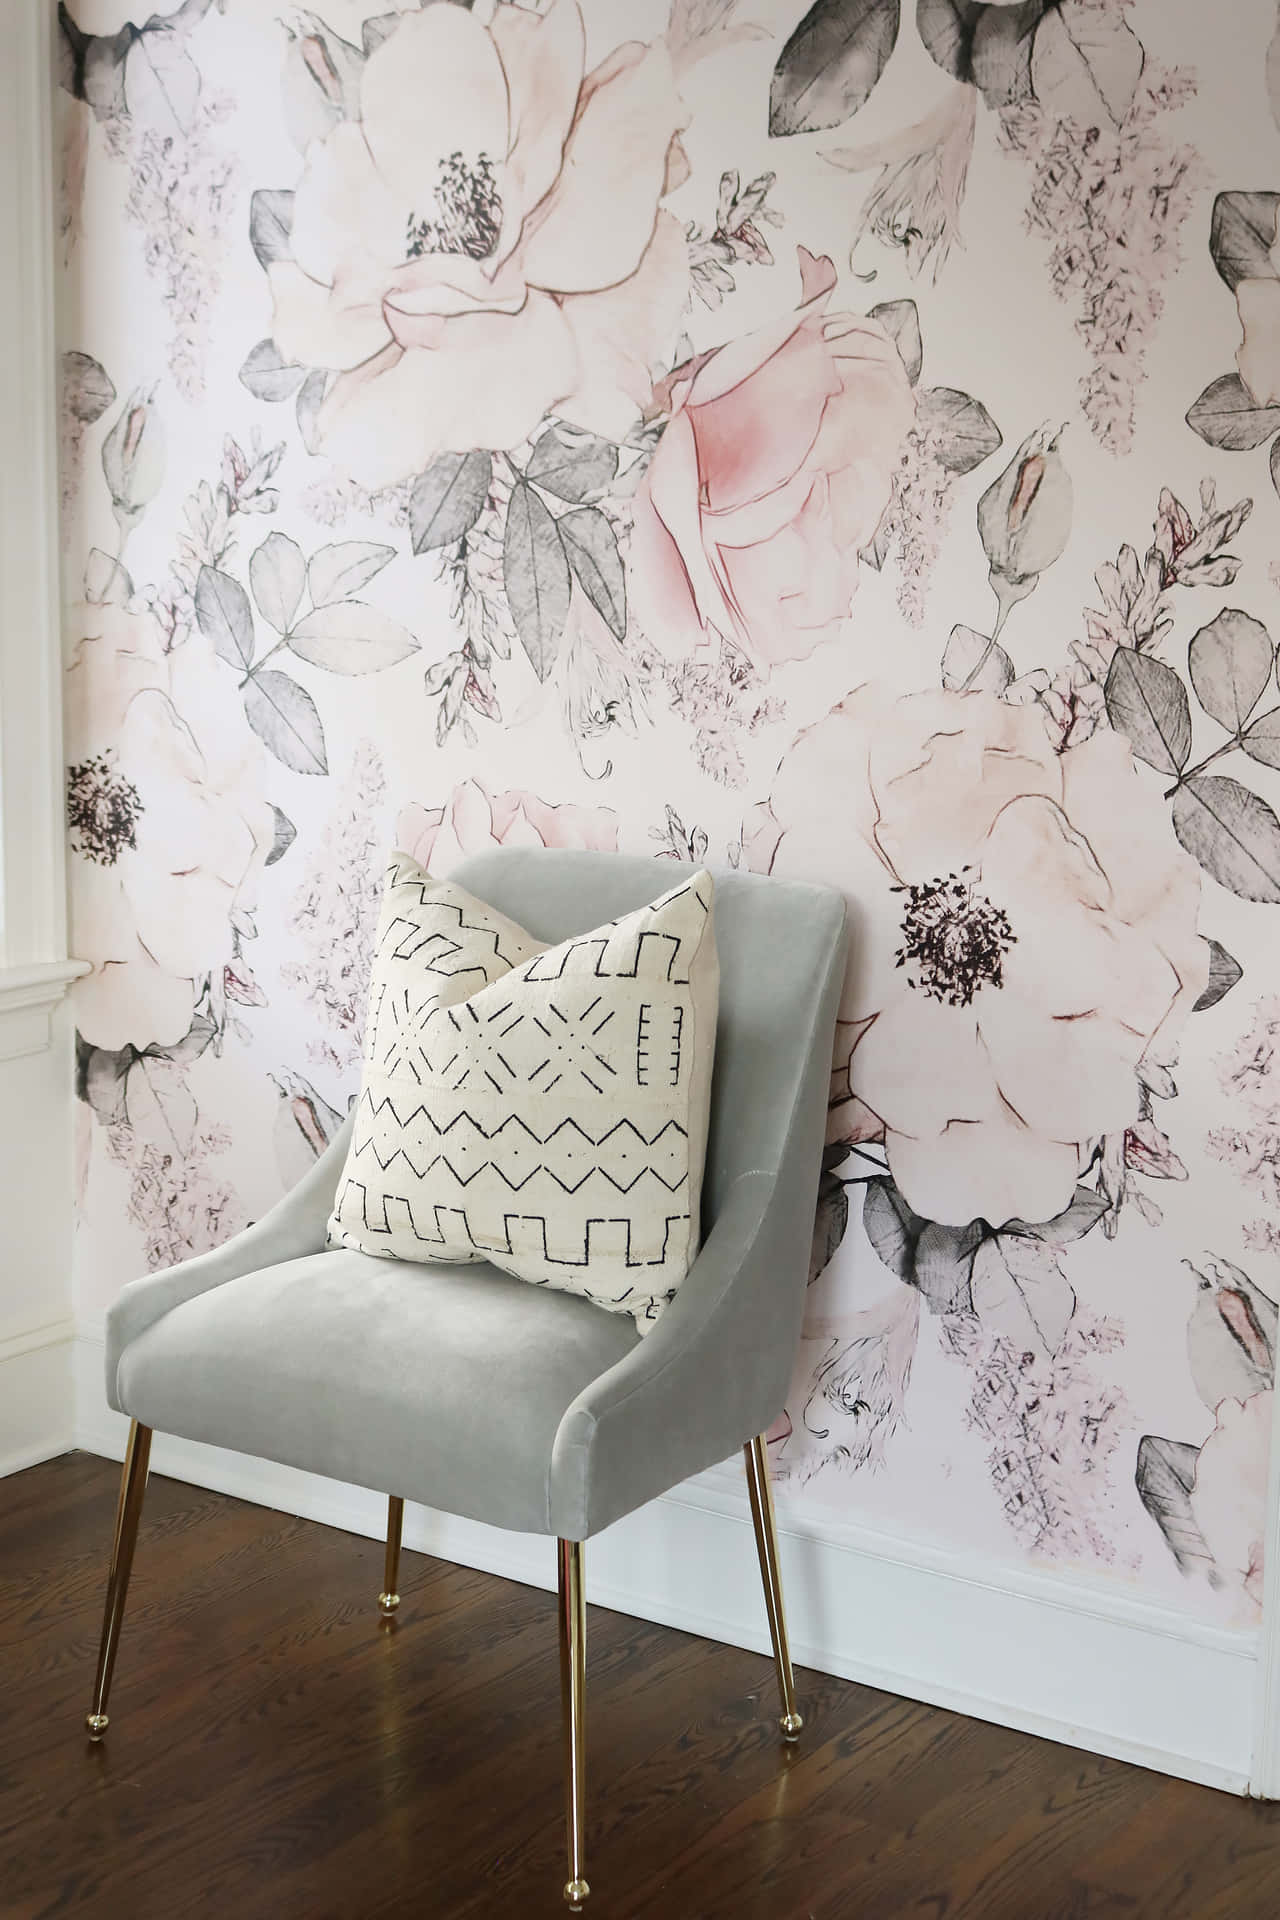 Classic Conventional Chair With Wall Art Wallpaper